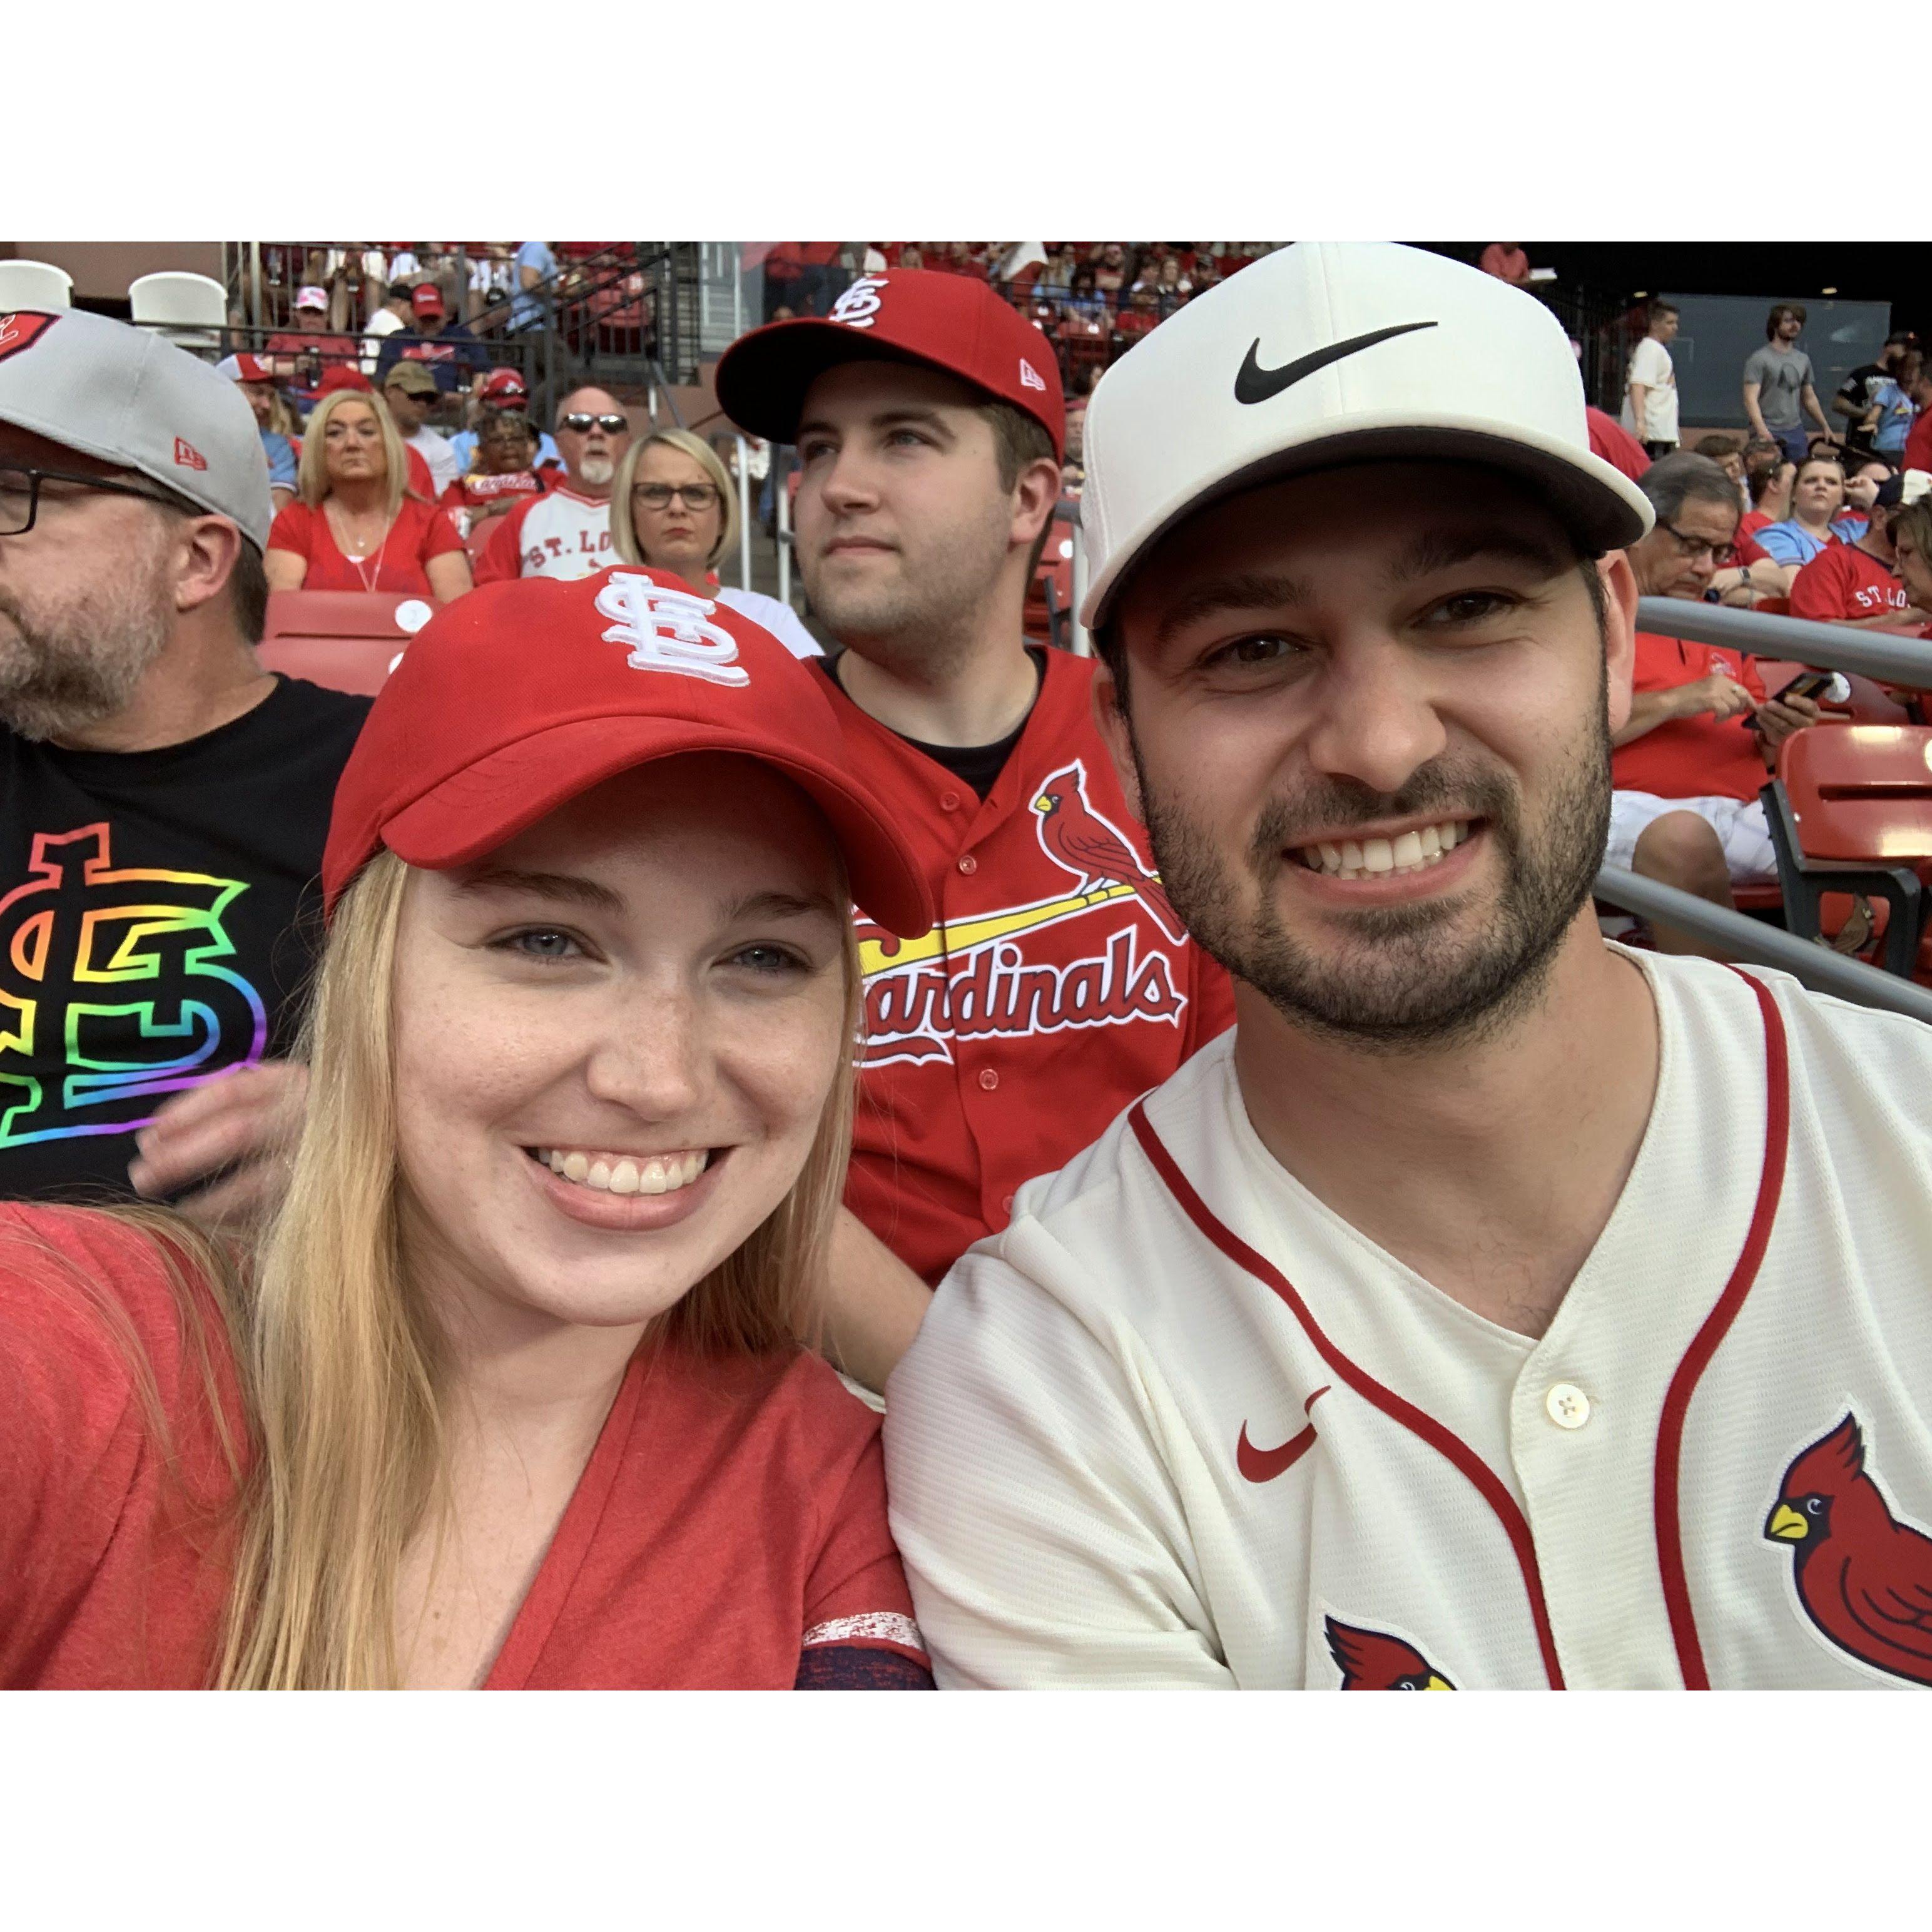 Cards game